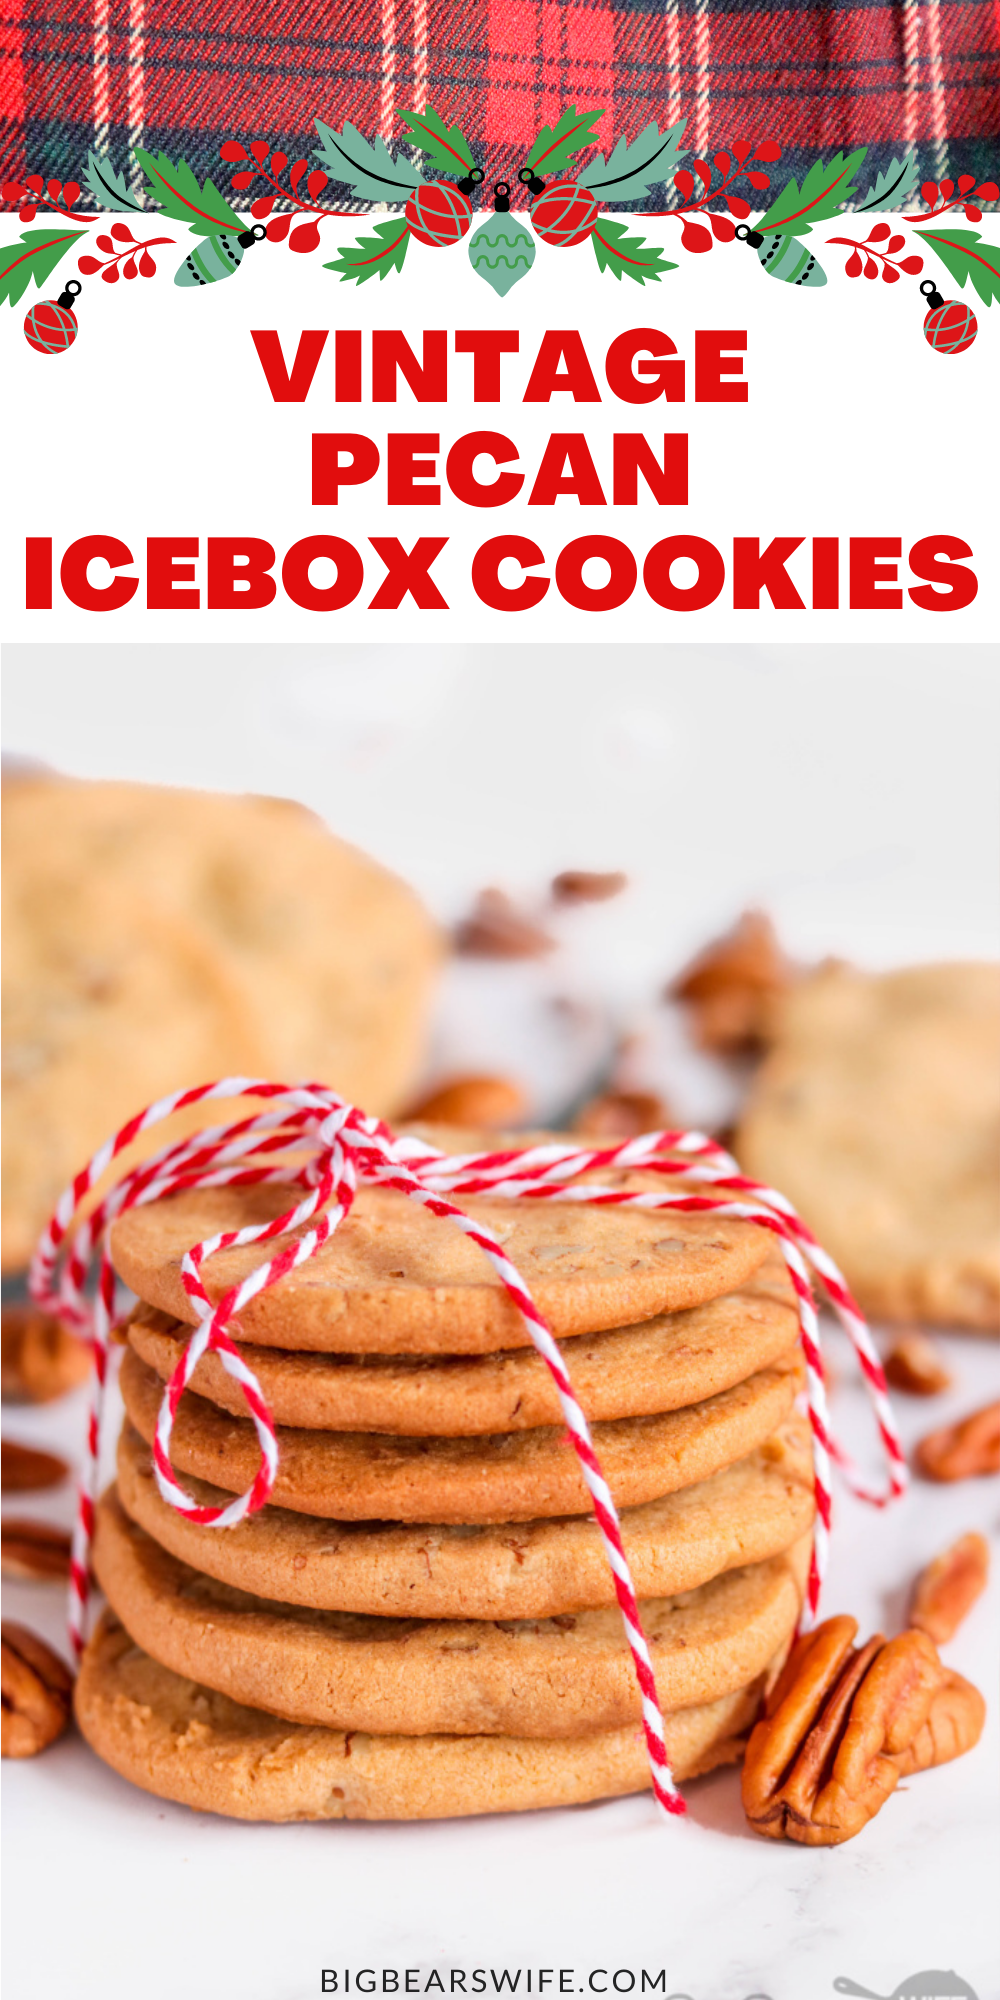 These Vintage Pecan Icebox Cookies are a tried and true classic recipe that first appeared in the Imperial Sugar 1930 edition of A Bag Full of Recipes cookbook. Make the dough, and let it chill overnight before slicing and baking this classic cookie that has stood the test of time. via @bigbearswife